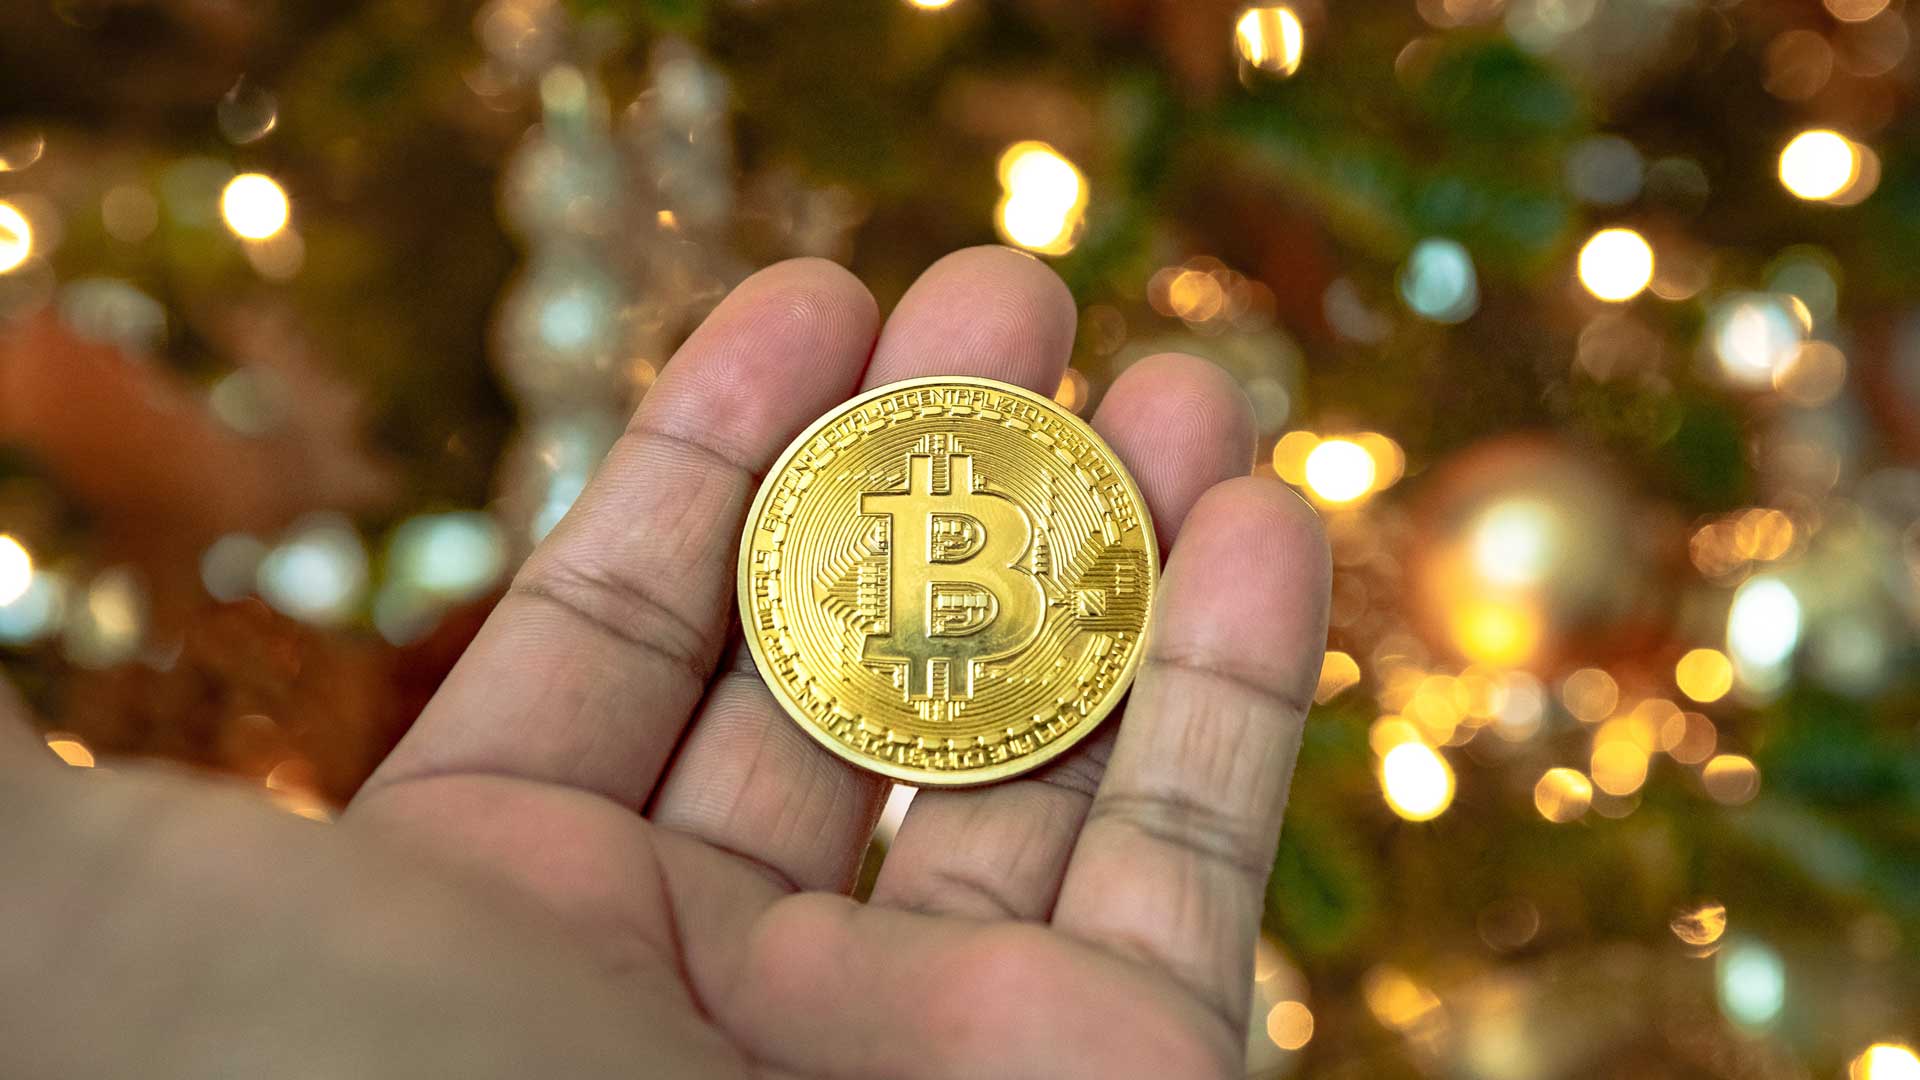 What Are the Potential Benefits of Having a Bitcoin?